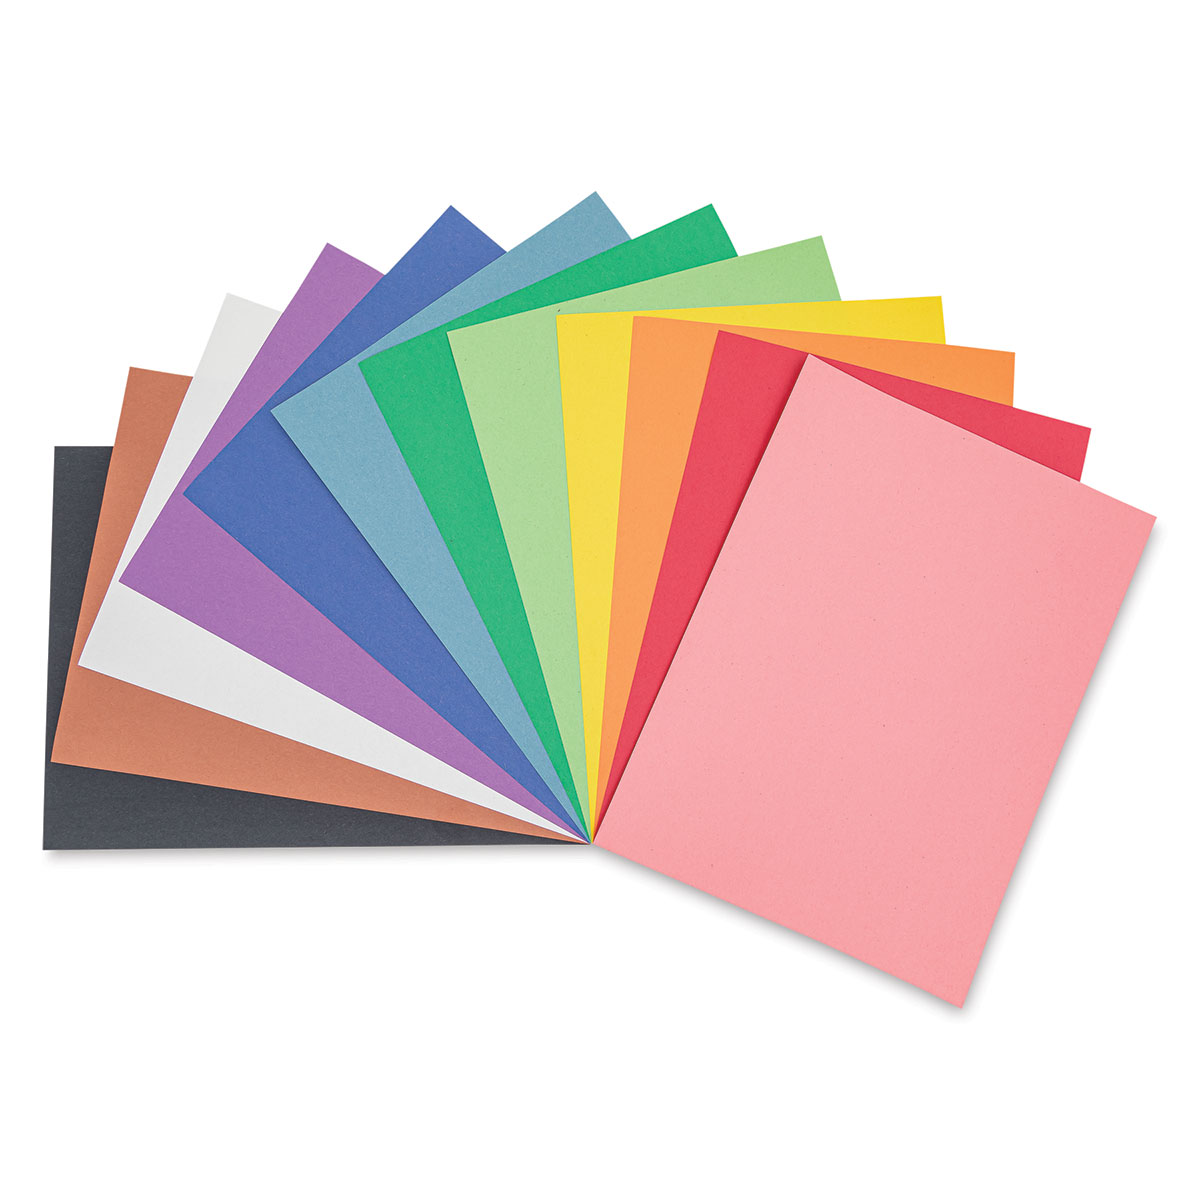 Crayola Project Giant Construction Paper 12X18-48 Sheets - Assorted Colors